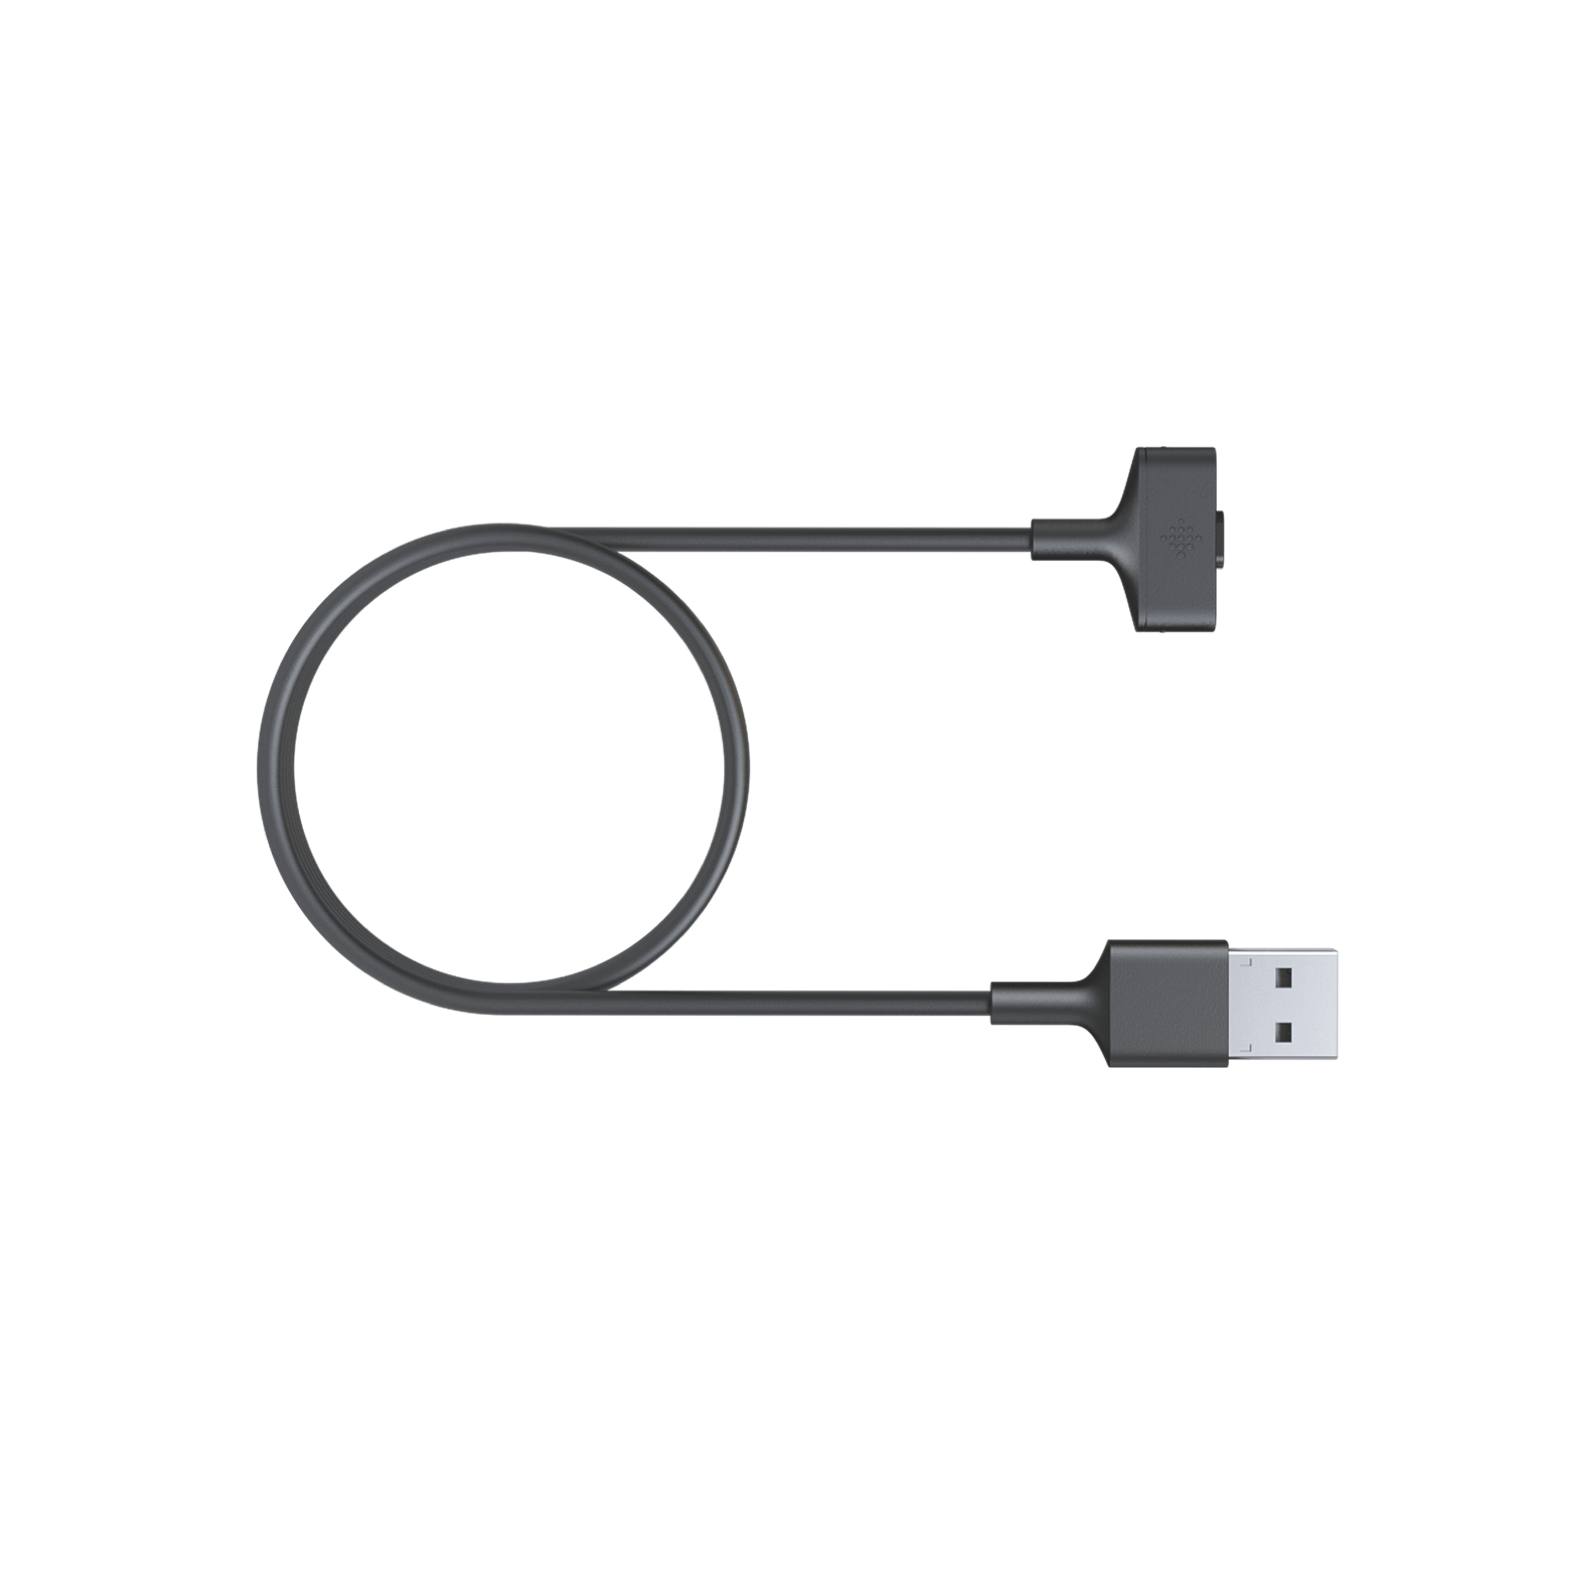 charger for fitbit ionic